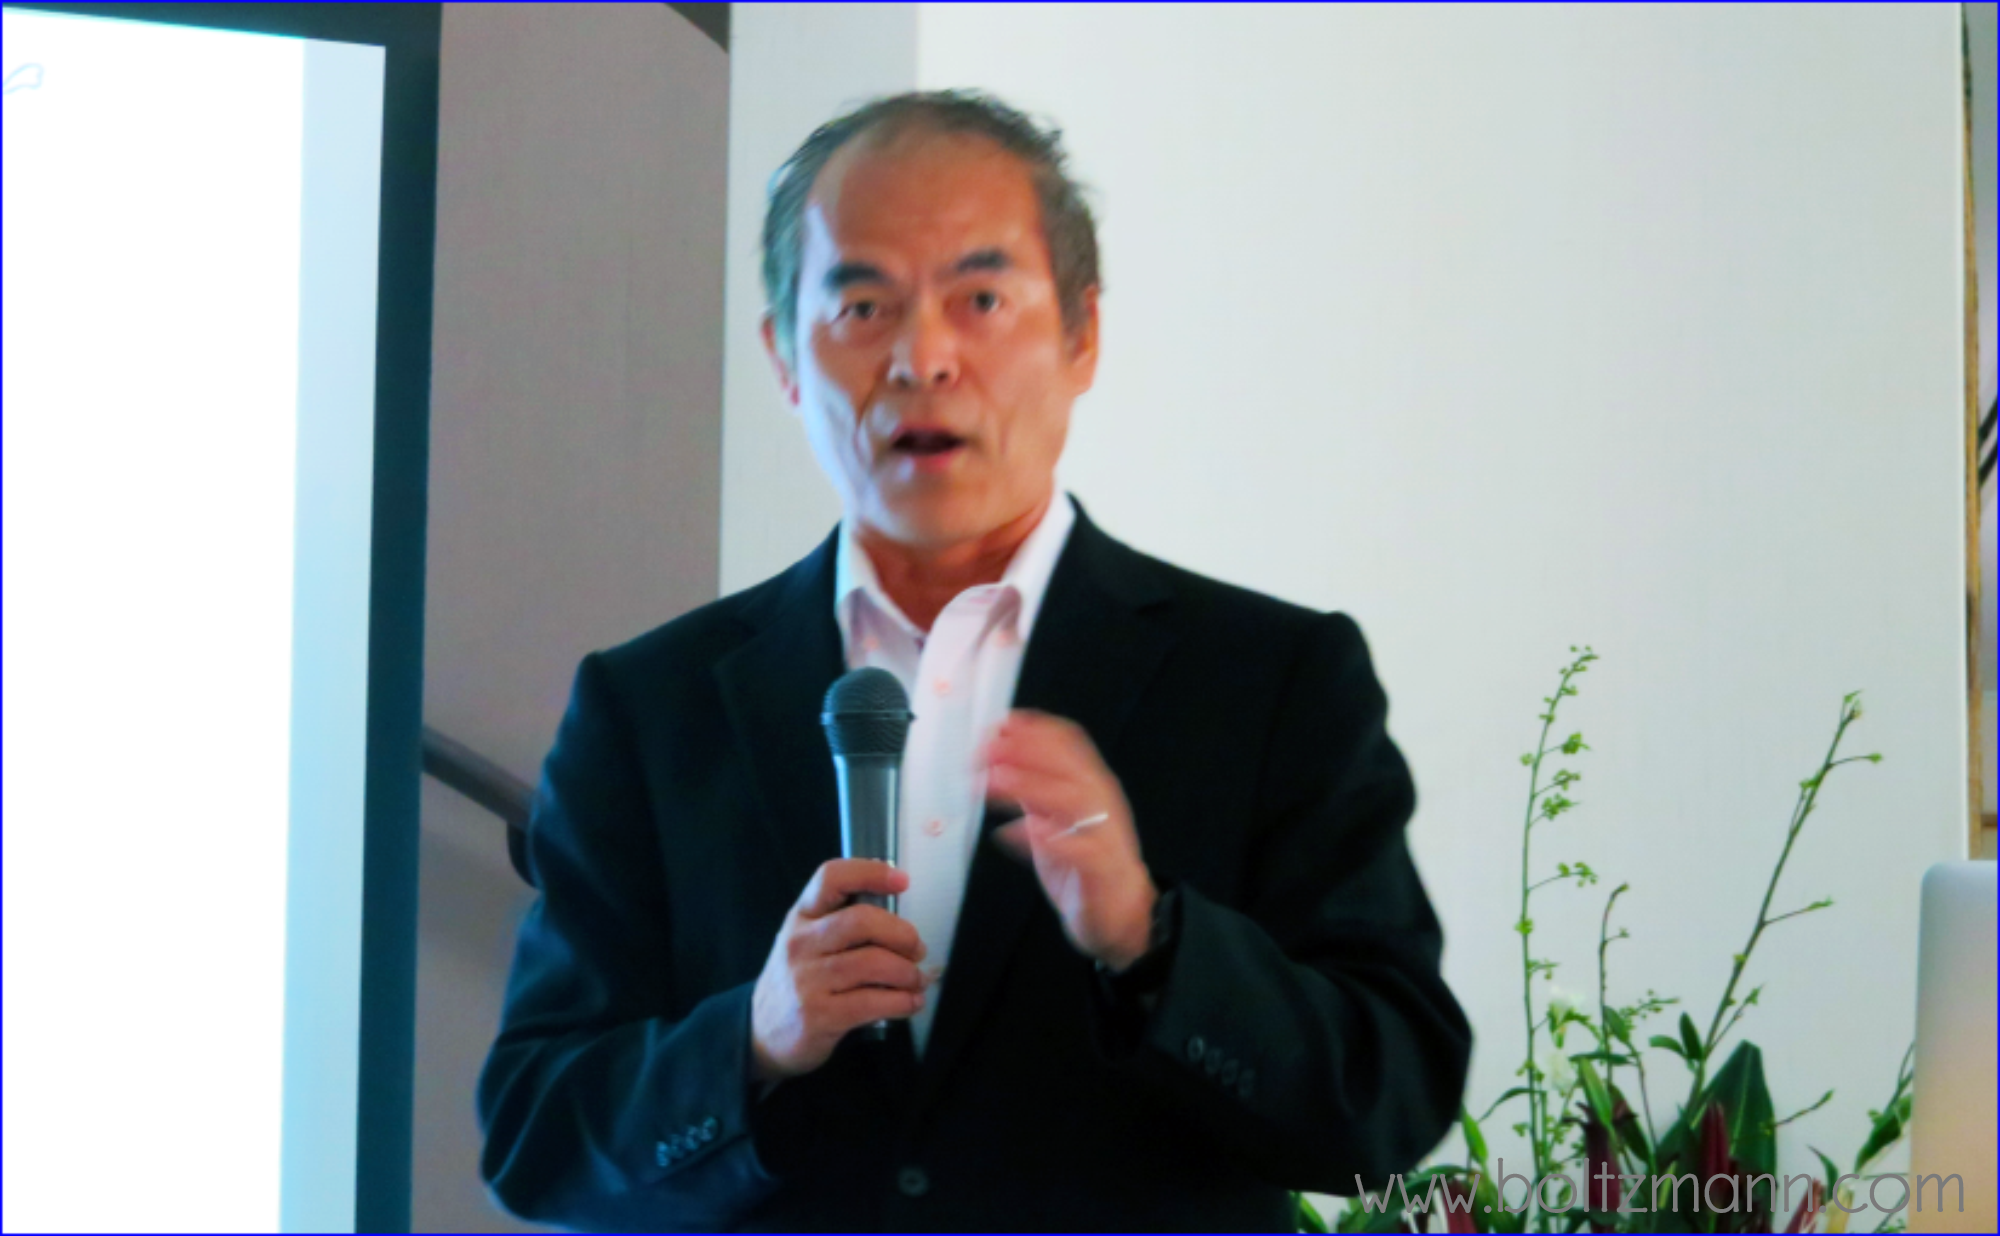 Shuji Nakamura: The invention of high efficiency LEDs and the impact on promoting innovation in Japan, and legal aspects